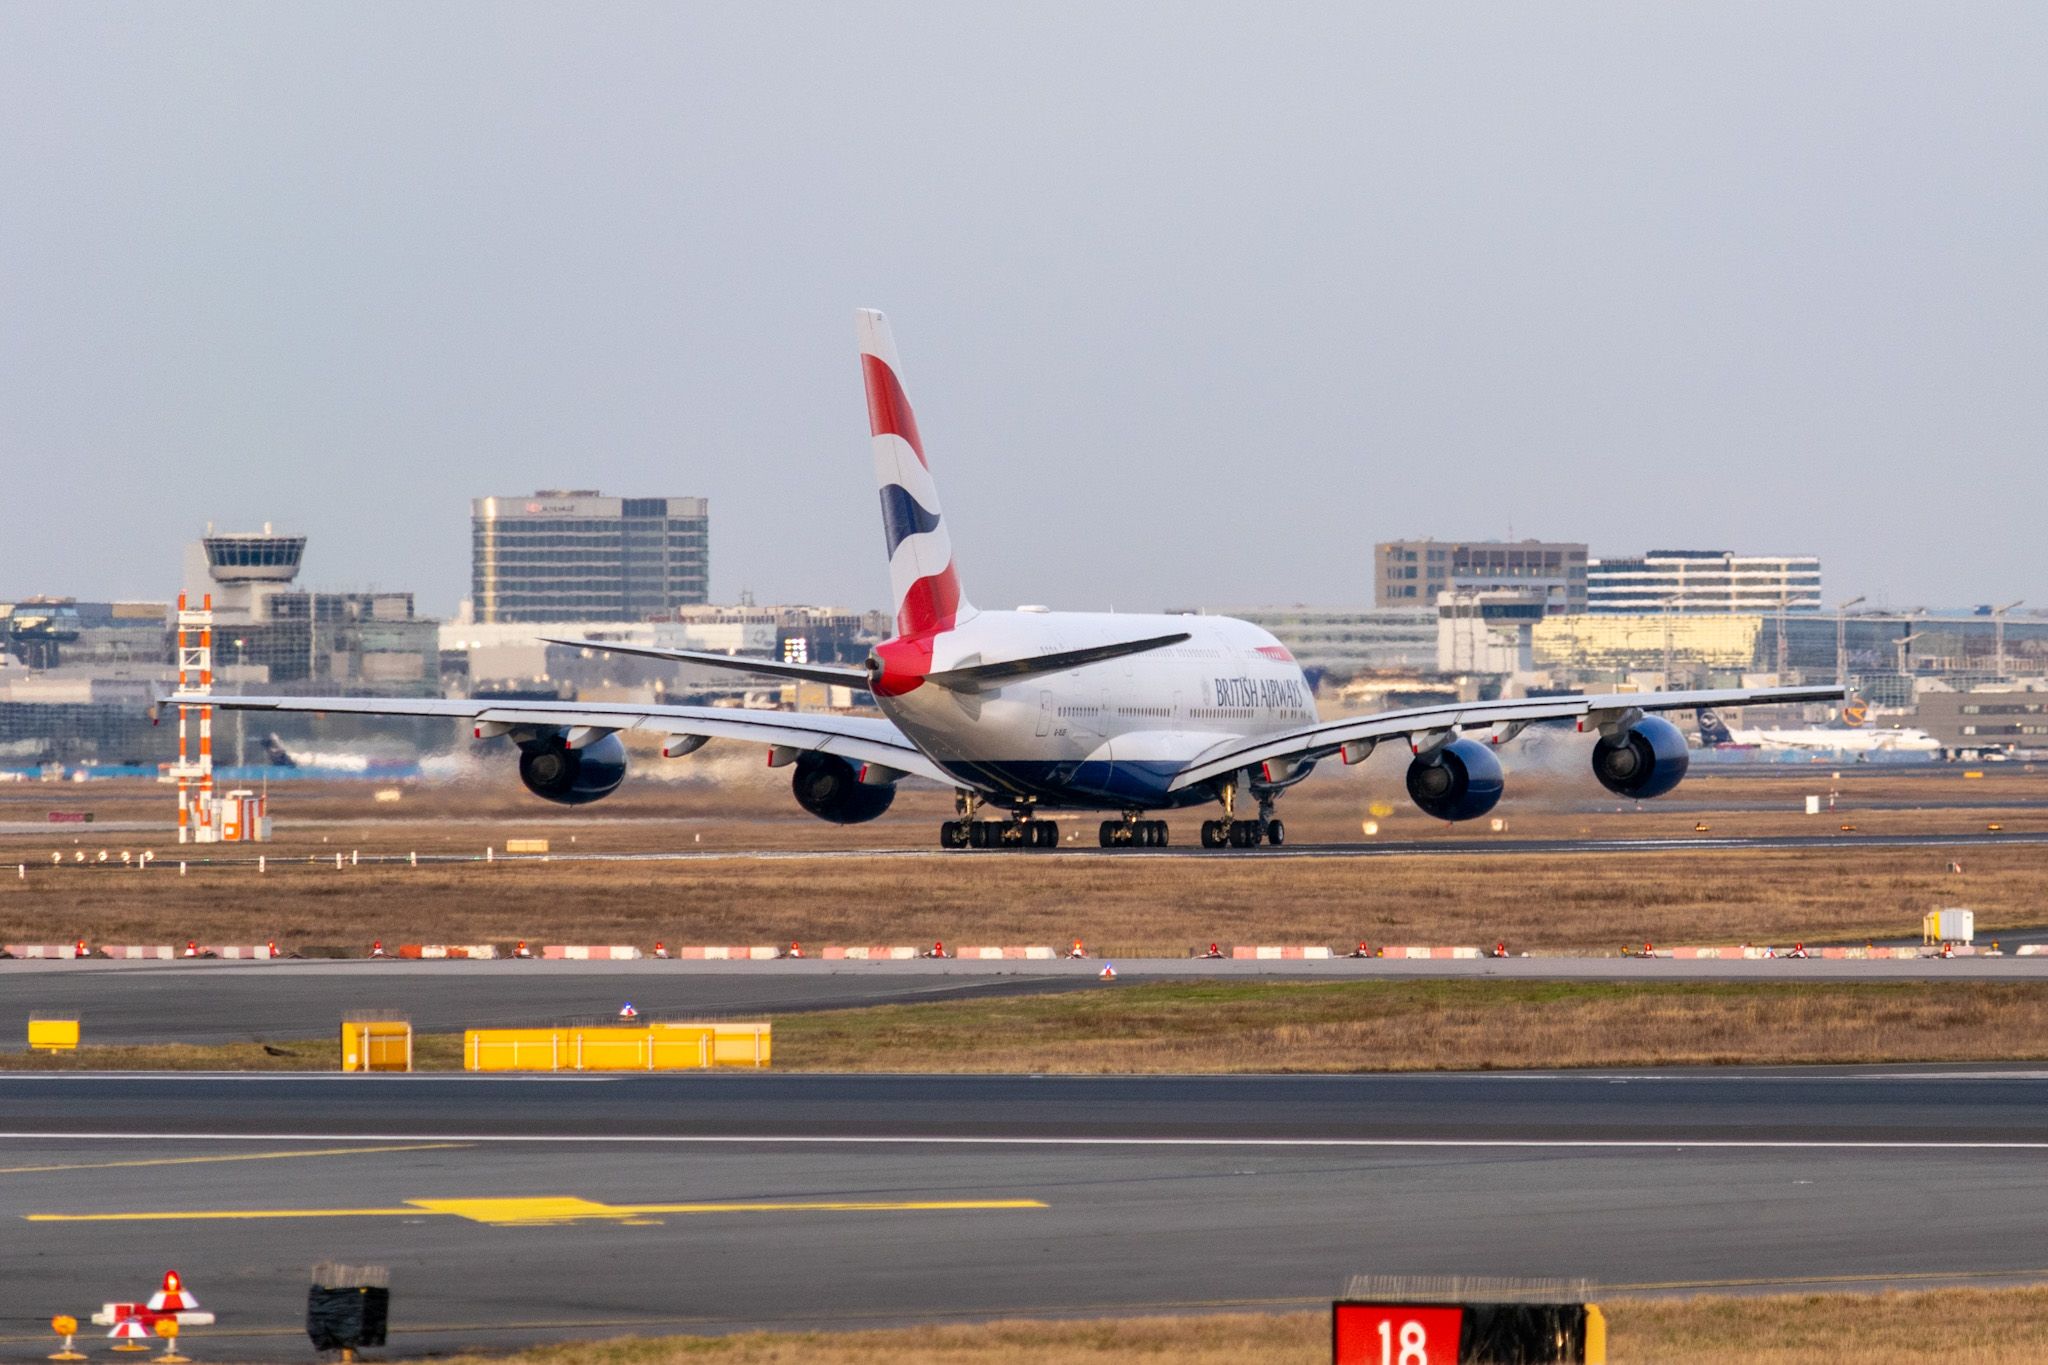 A British Airways Airbus A380 on an airport apron.